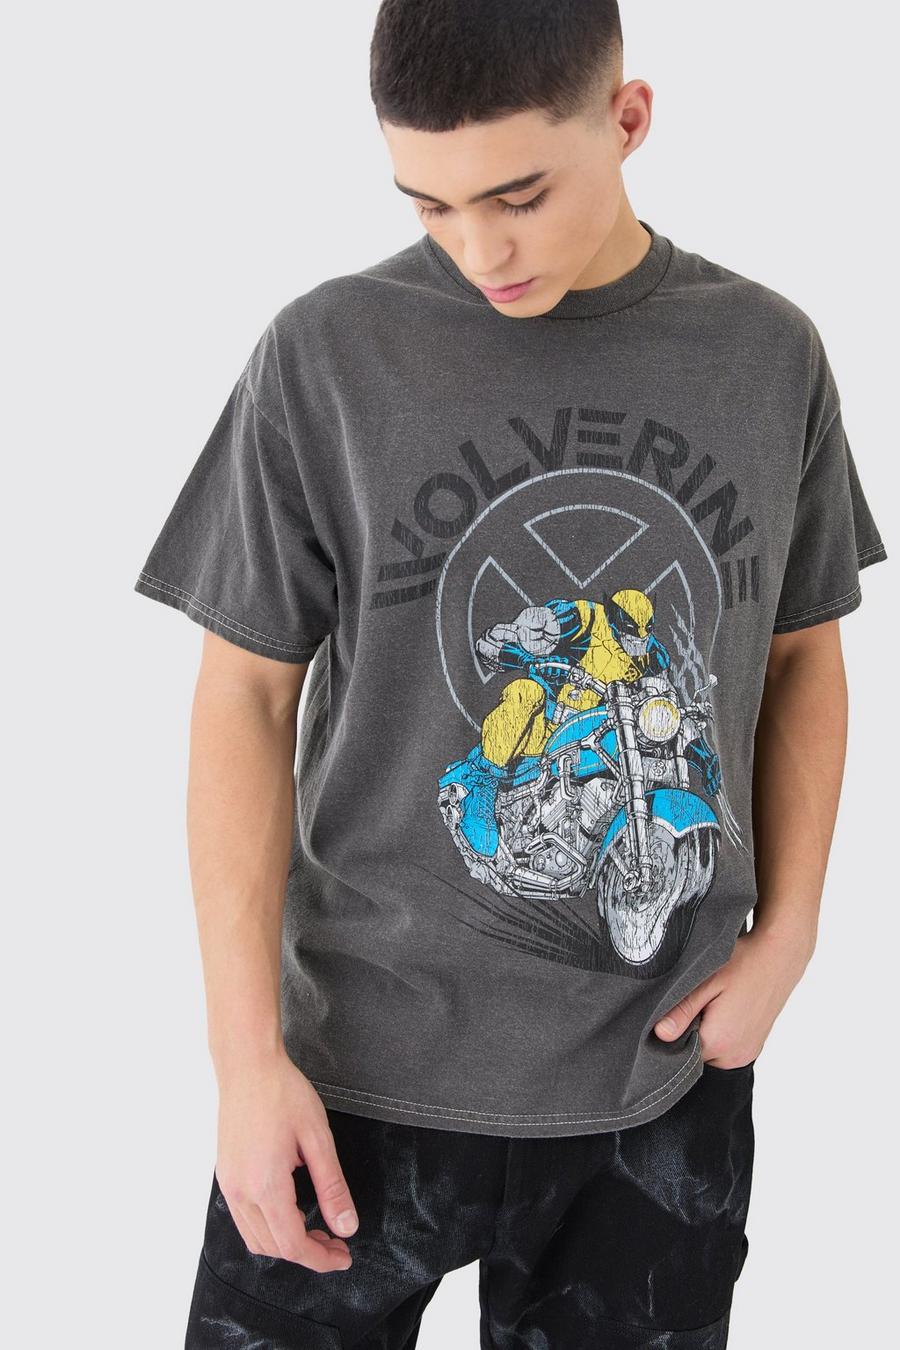 T-shirt oversize ufficiale X Men in lavaggio Wolverine, Charcoal